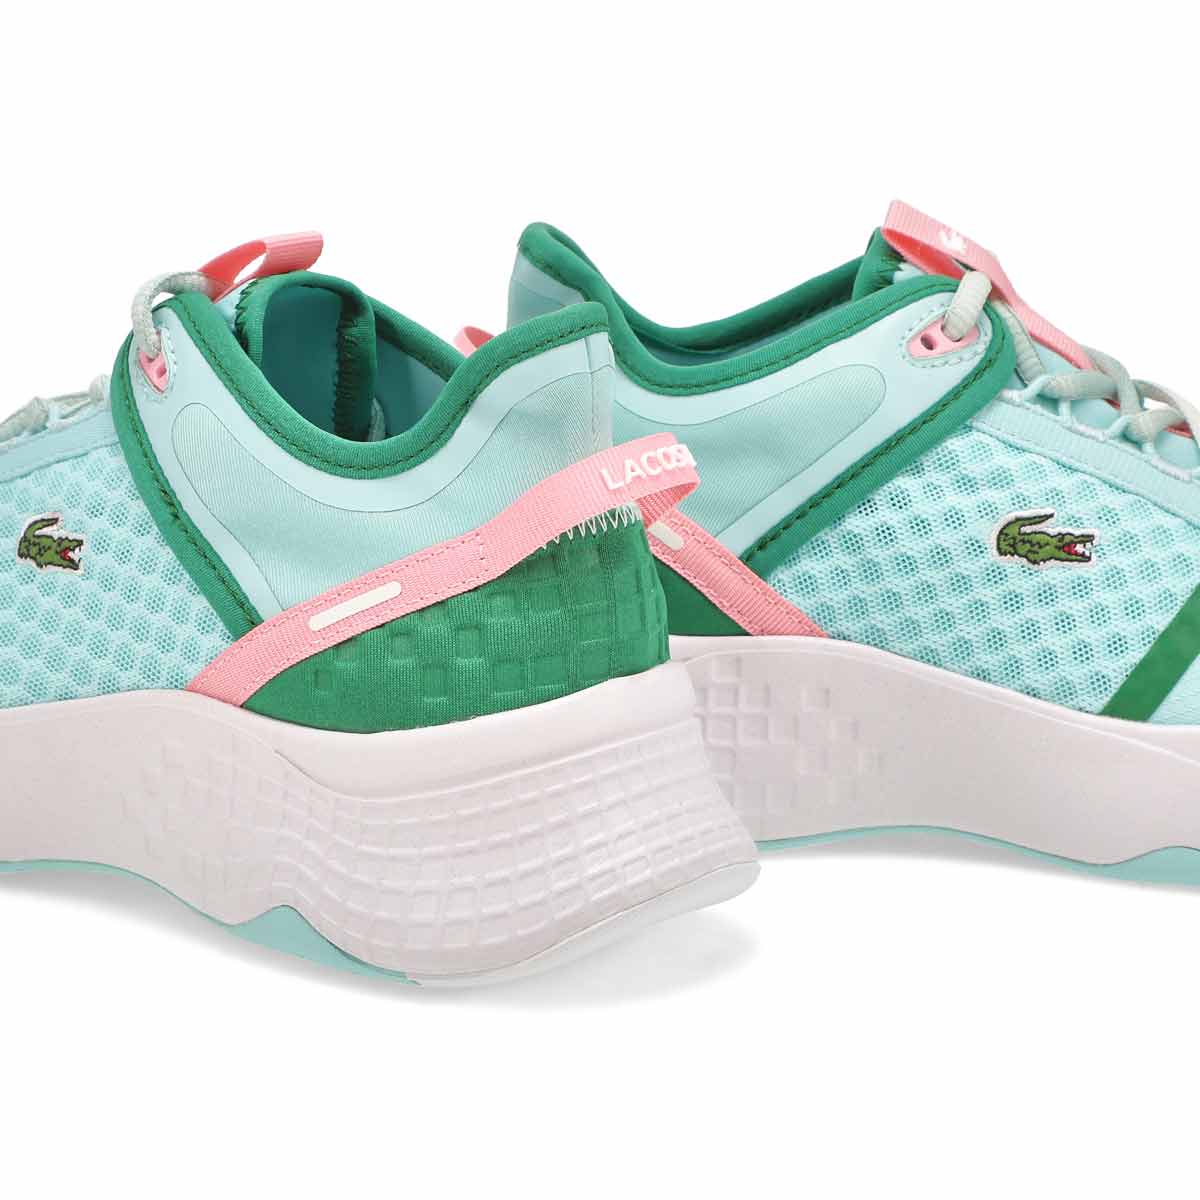 Women's Court-Drive Vnt Sneaker - Turquoise /Pink